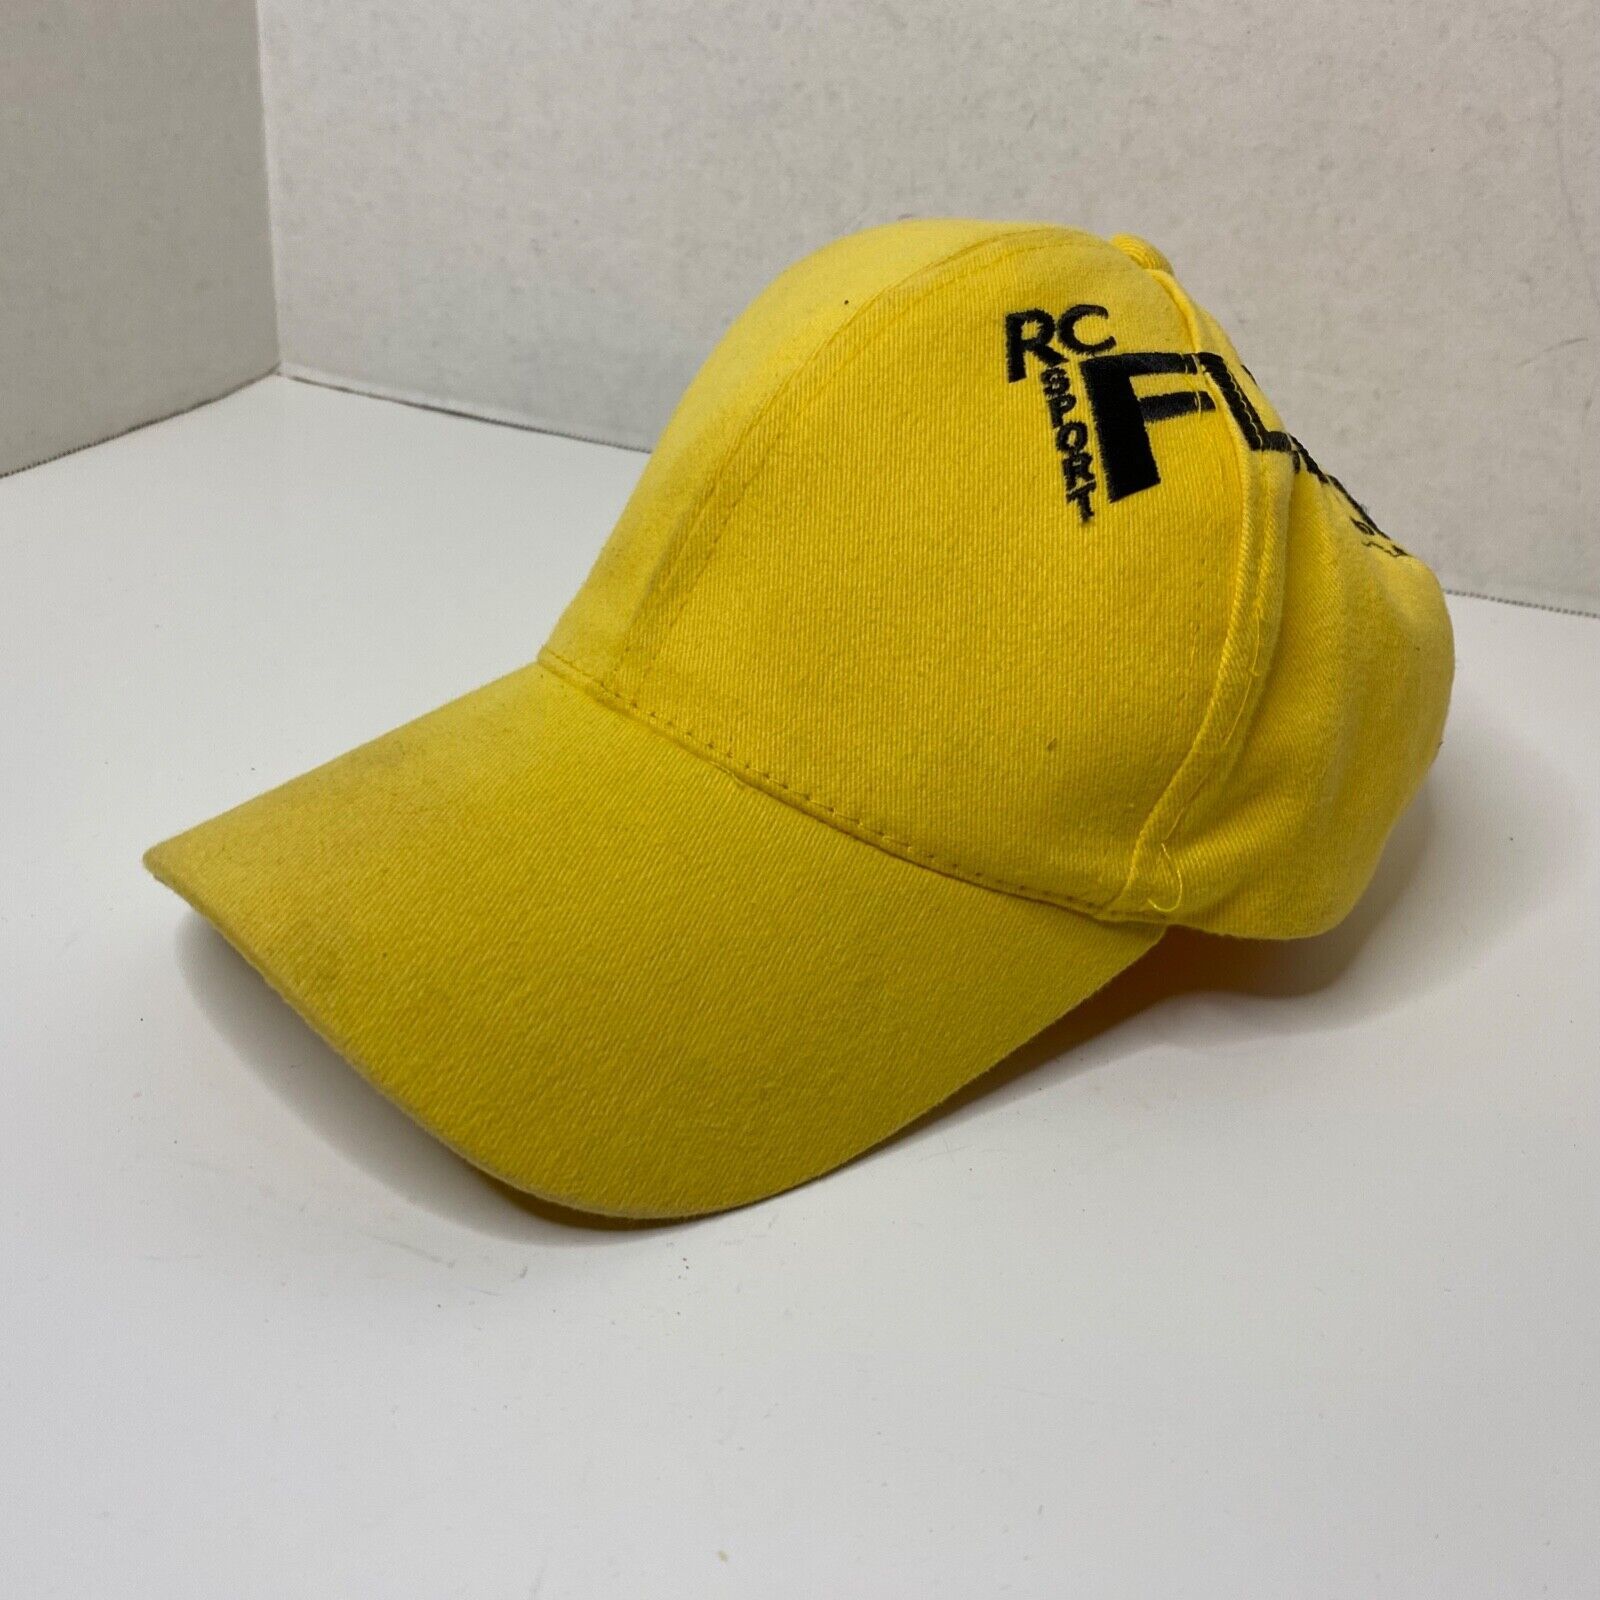 Primary image for RC Sport Flyer Magazine Hat Baseball Cap Yellow Adjustable